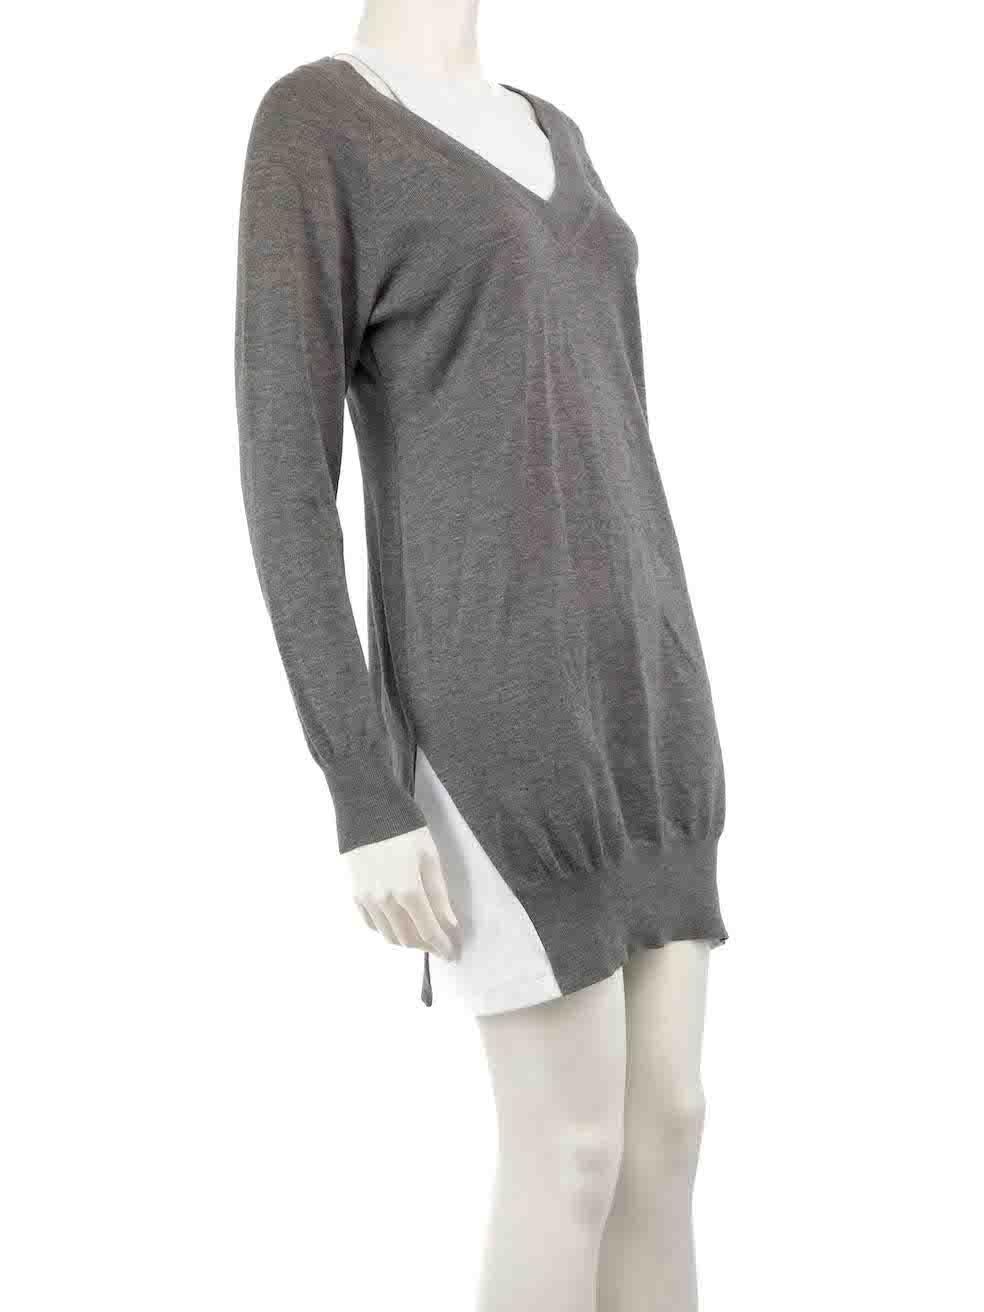 CONDITION is Very good. Hardly any visible wear to dress is evident on this used Alexander Wang designer resale item.
 
 
 
 Details
 
 
 Grey
 
 Wool
 
 Knit dress
 
 Mini
 
 Long sleeves
 
 Layered detail
 
 Round neck
 
 
 
 
 
 Made in China
 
